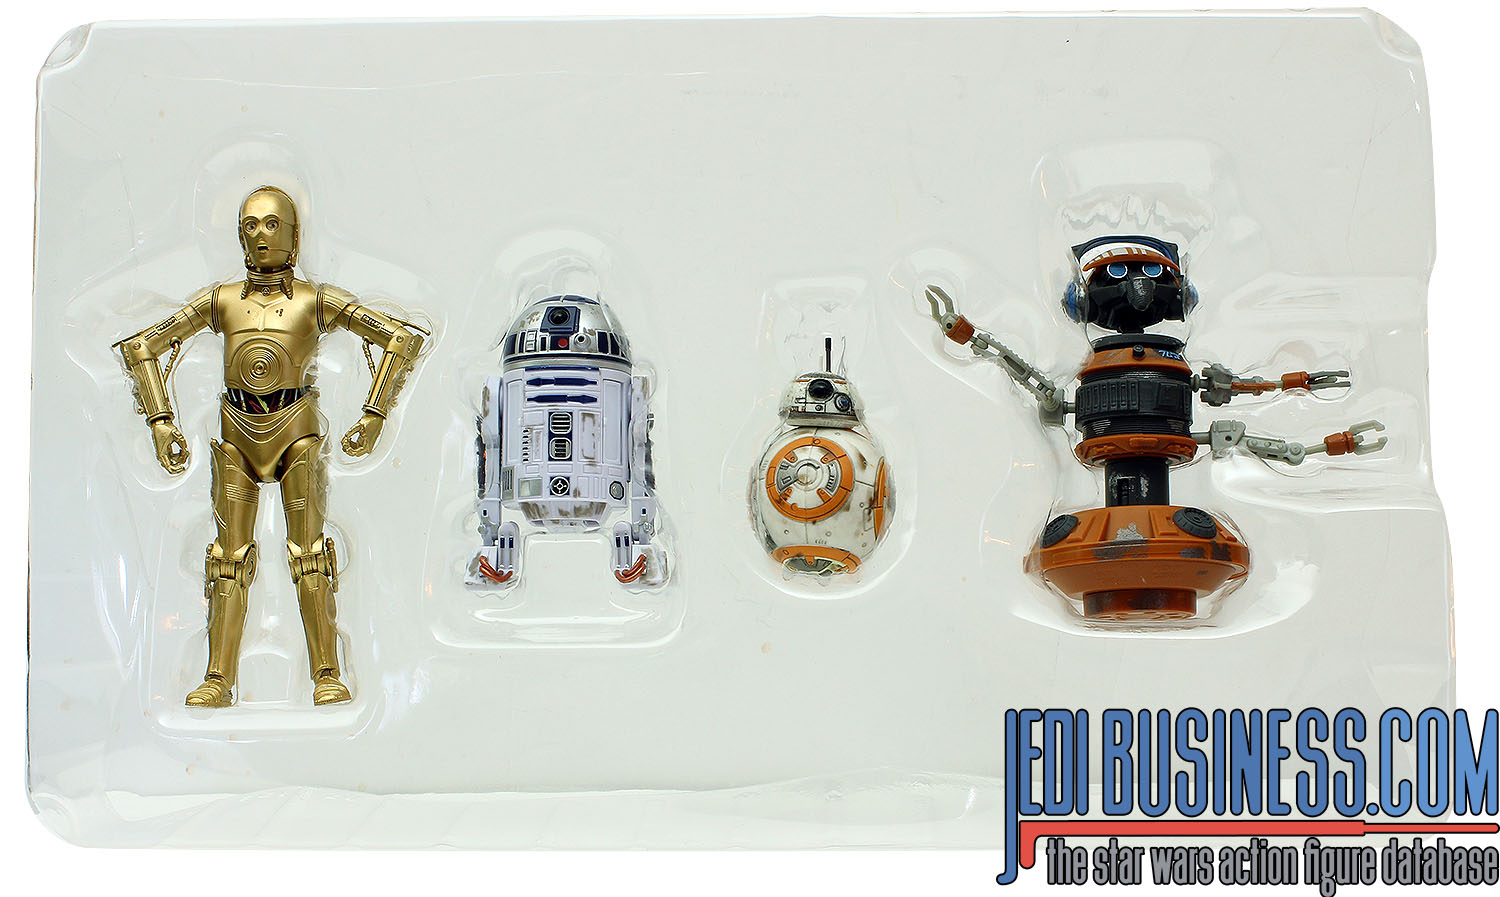 BB-8 Droid Depot 4-Pack